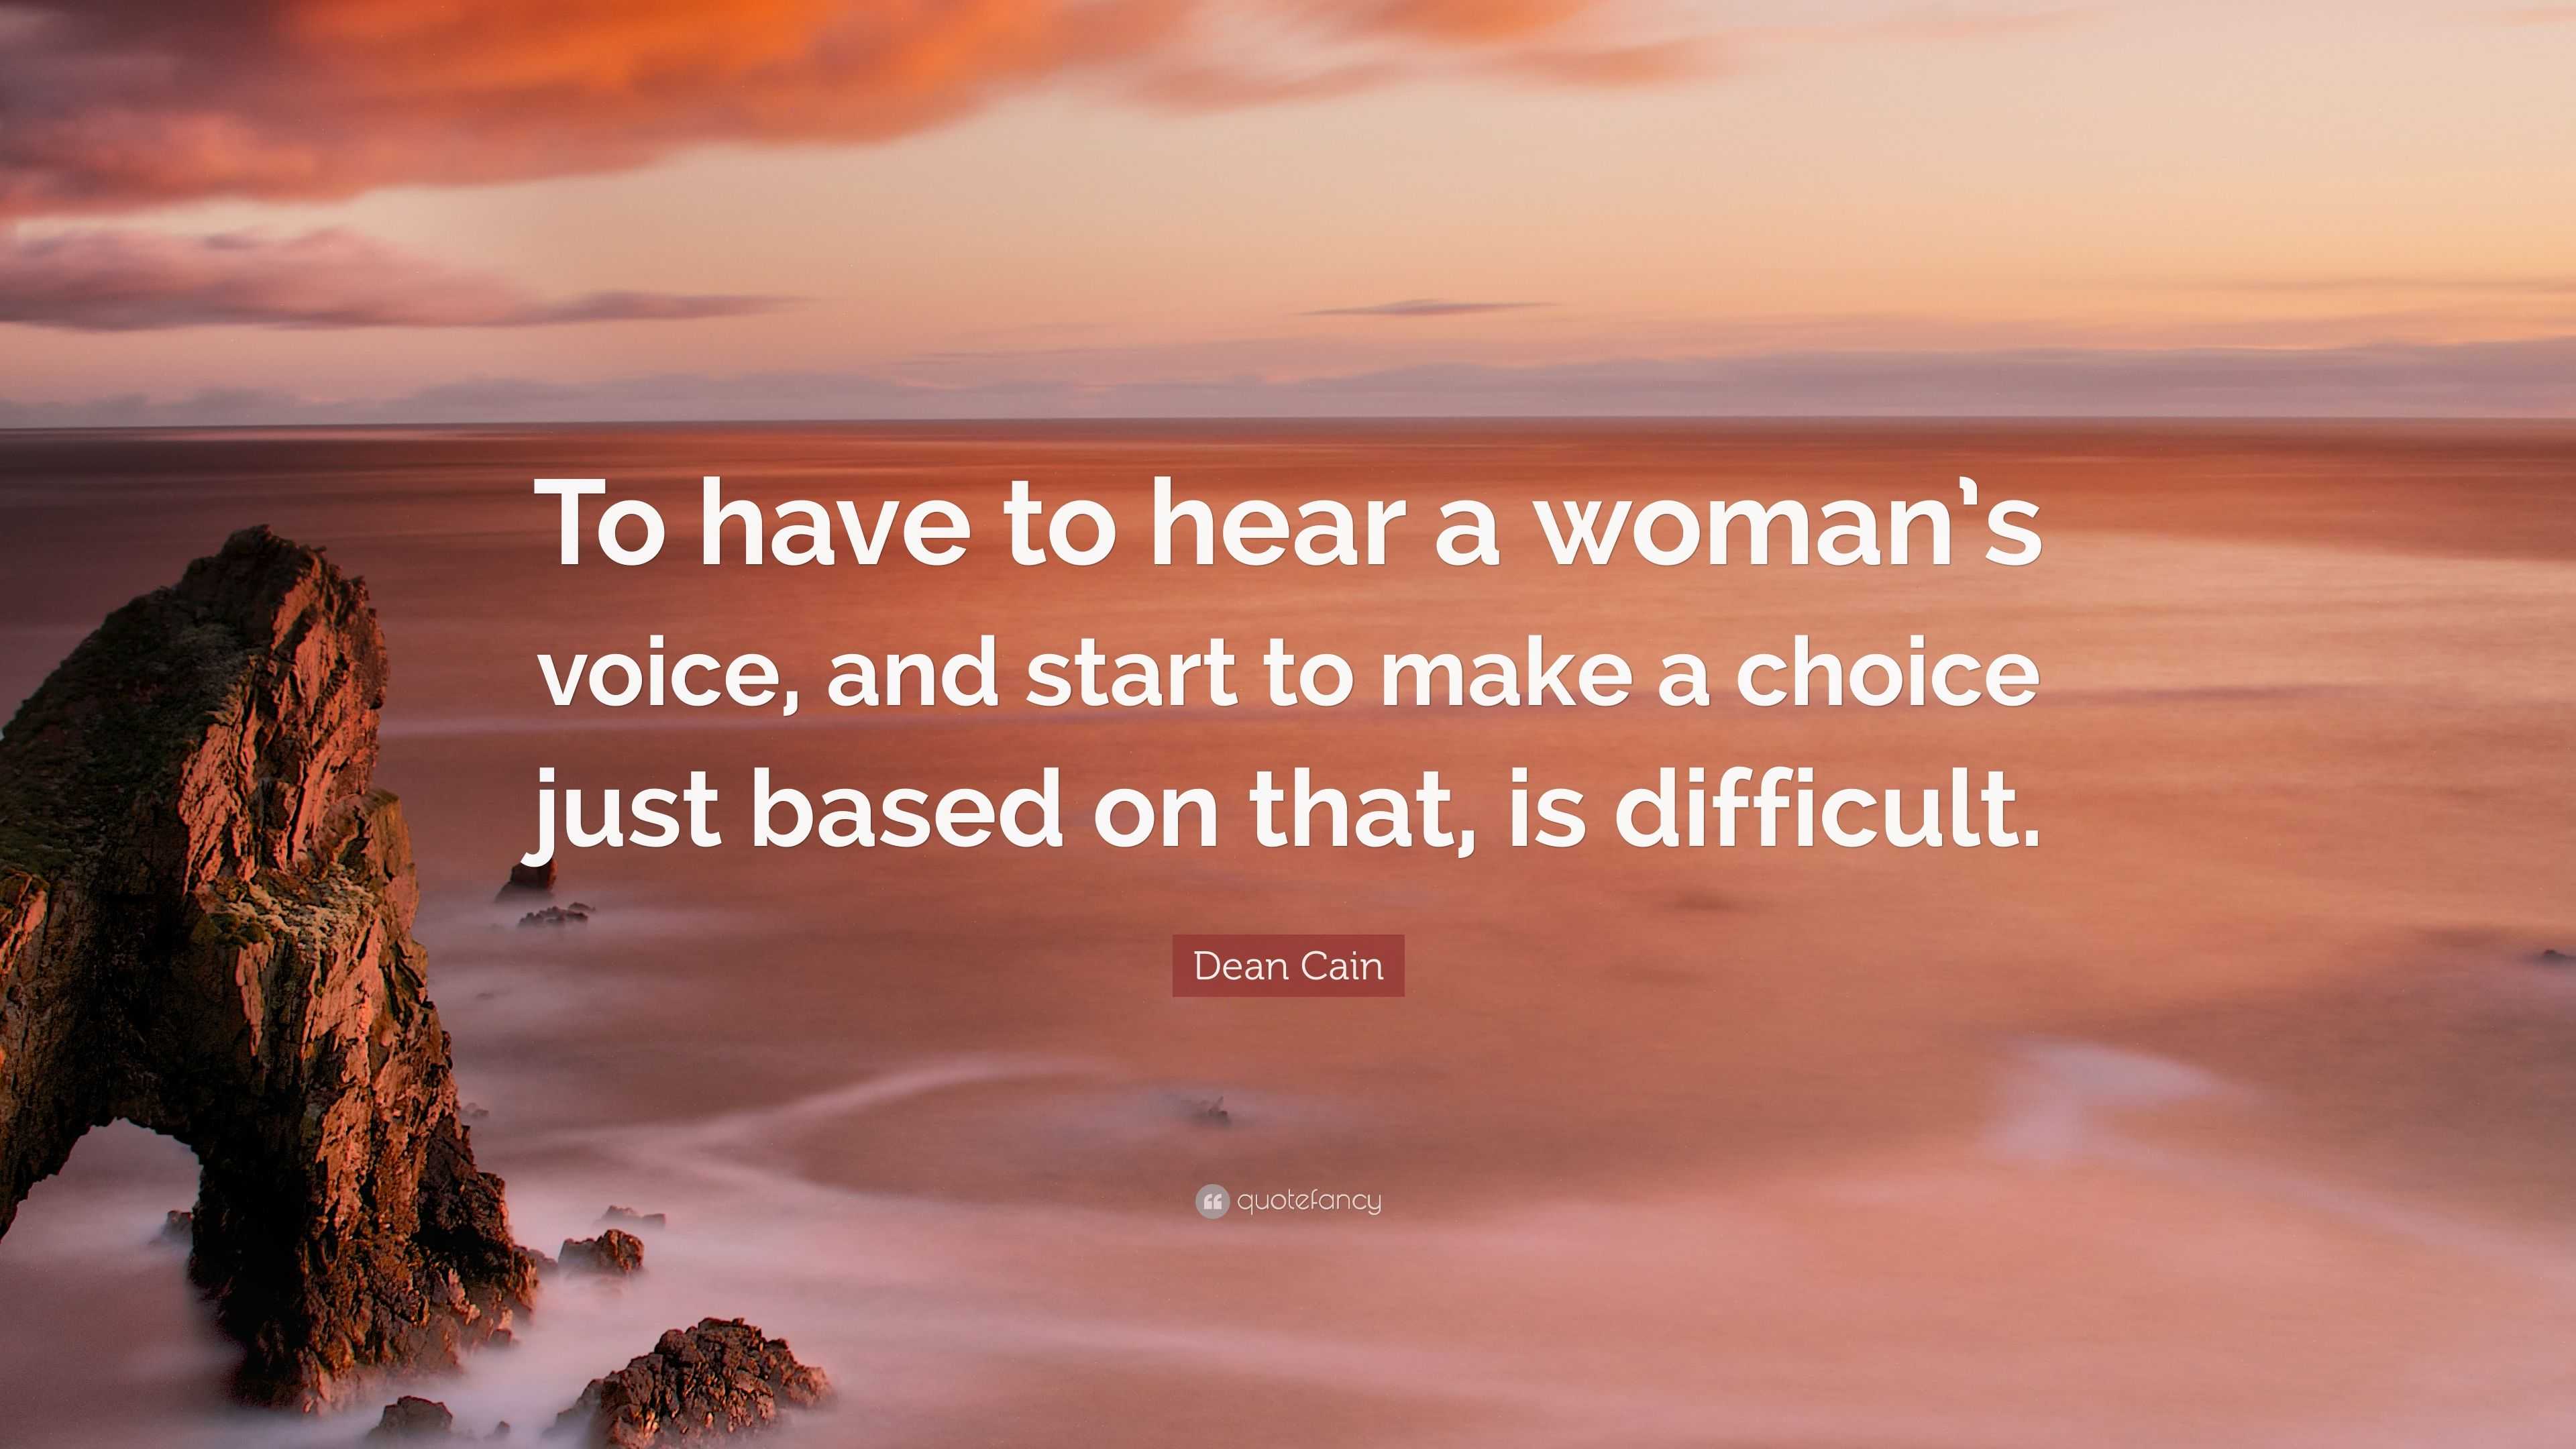 Dean Cain Quote: “To have to hear a woman’s voice, and start to make a ...